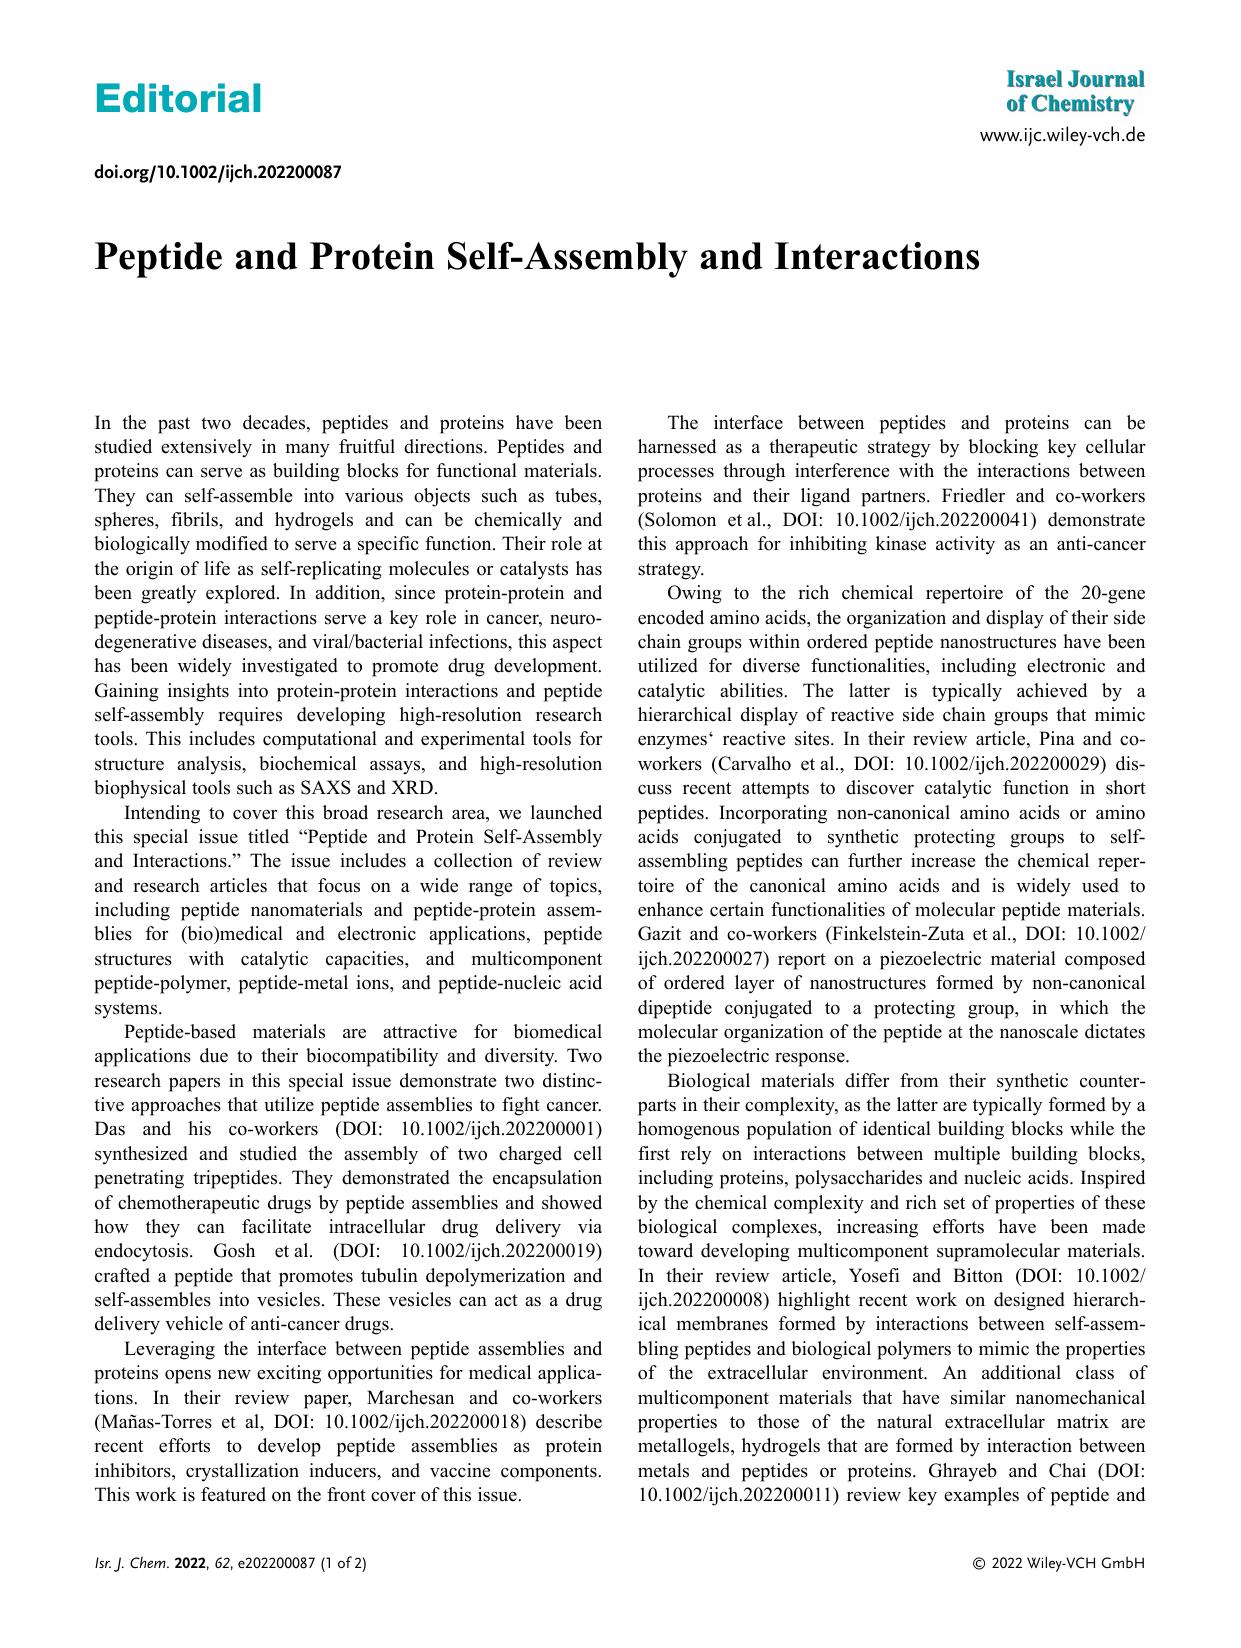 Peptide and Protein SelfâAssembly and Interactions by Unknown